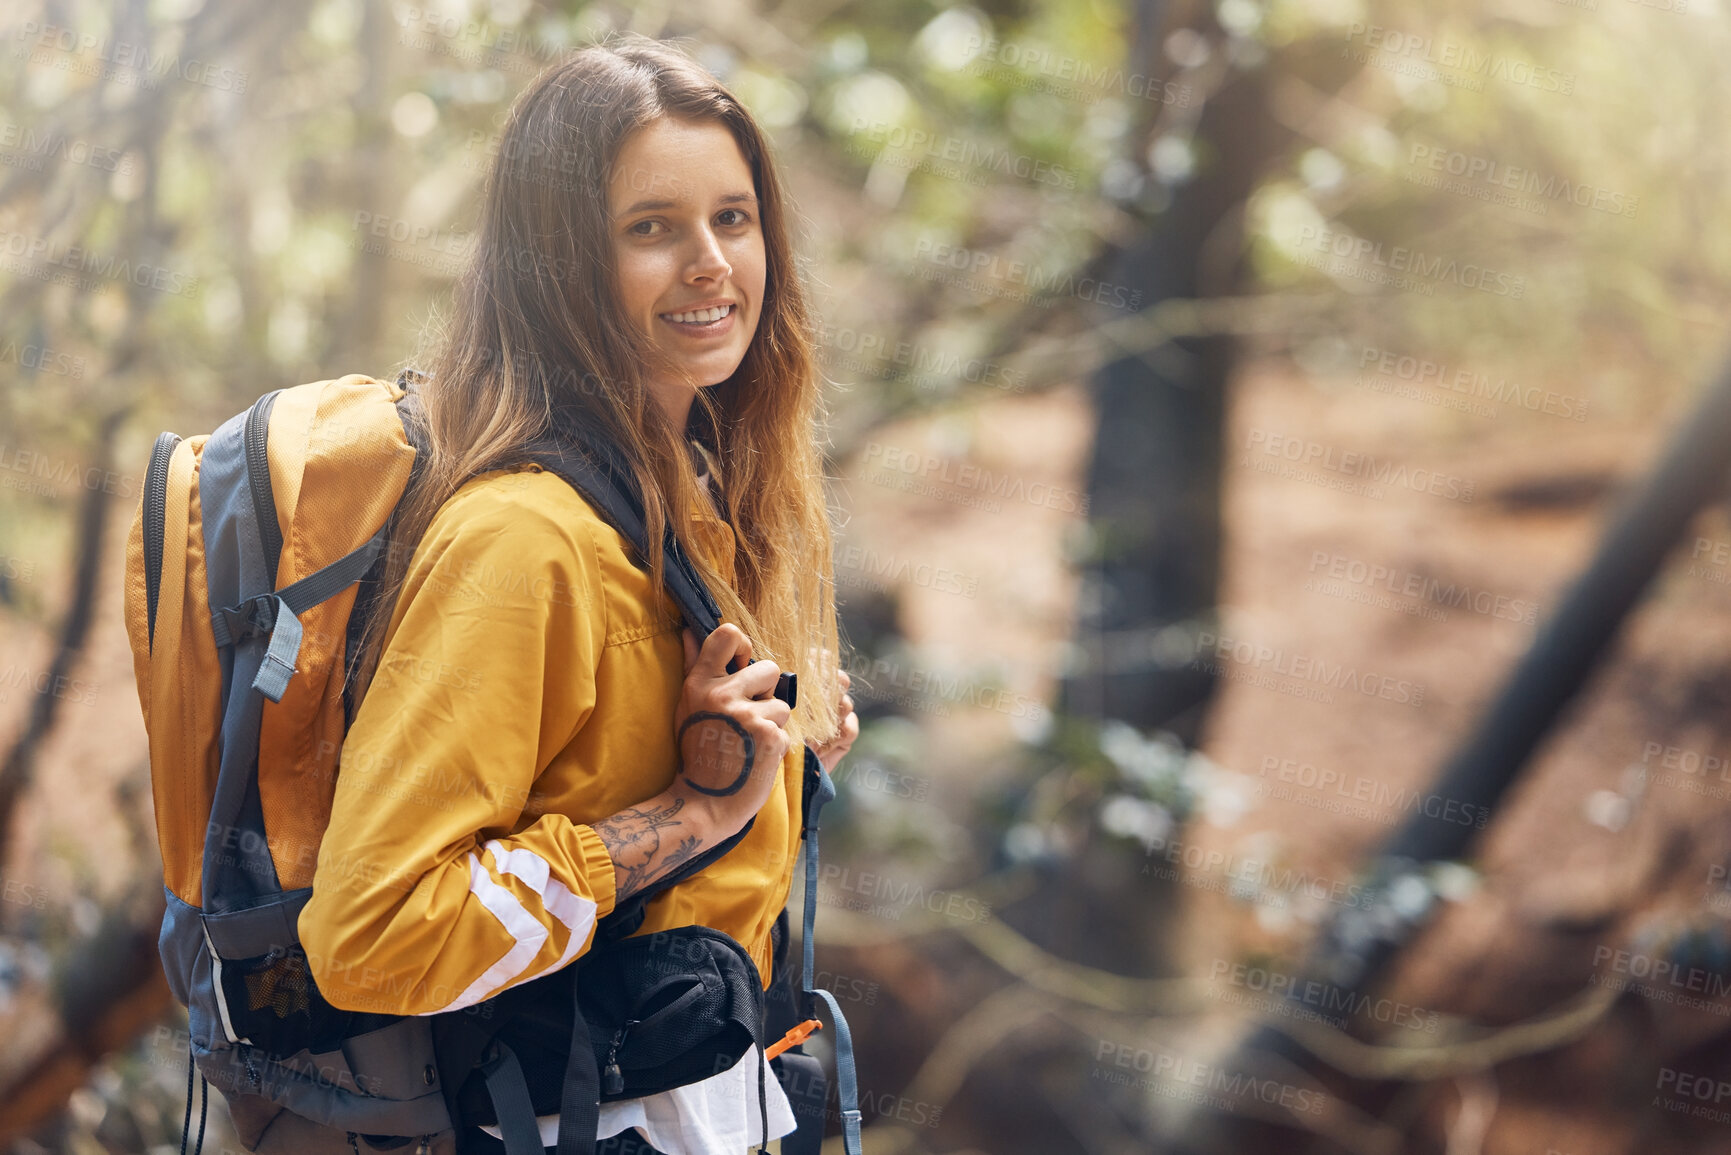 Buy stock photo One young active caucasian woman wearing a backpack while out hiking in the forest. Young brunette female walking alone in the woods. She loves being outdoors in nature. Hiking is her favourite hobby